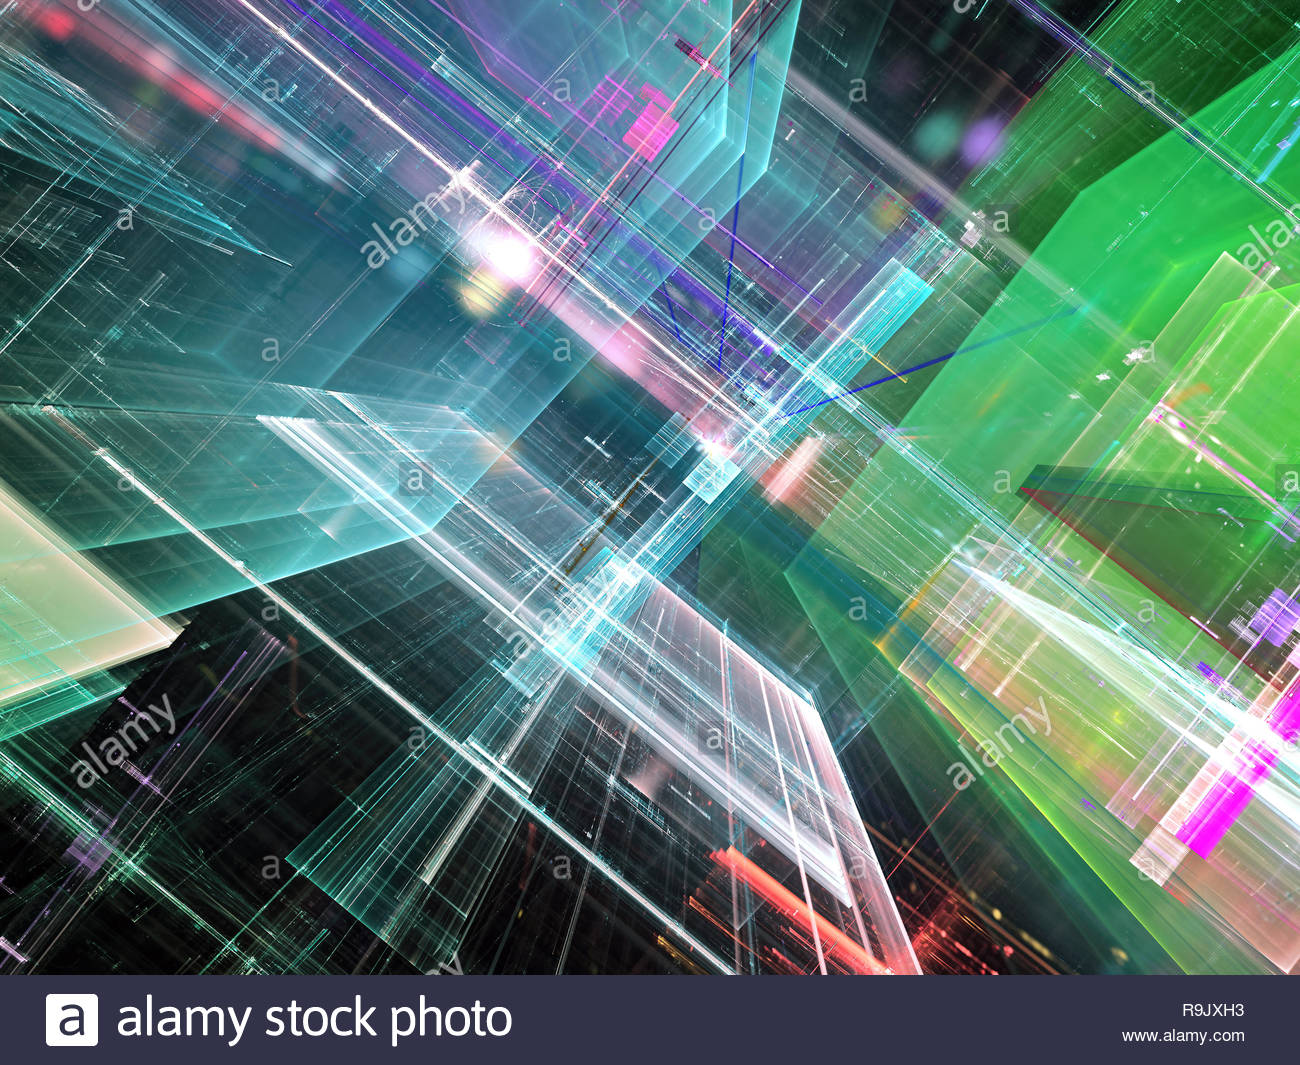 Abstract tech or science fiction background   computer generated